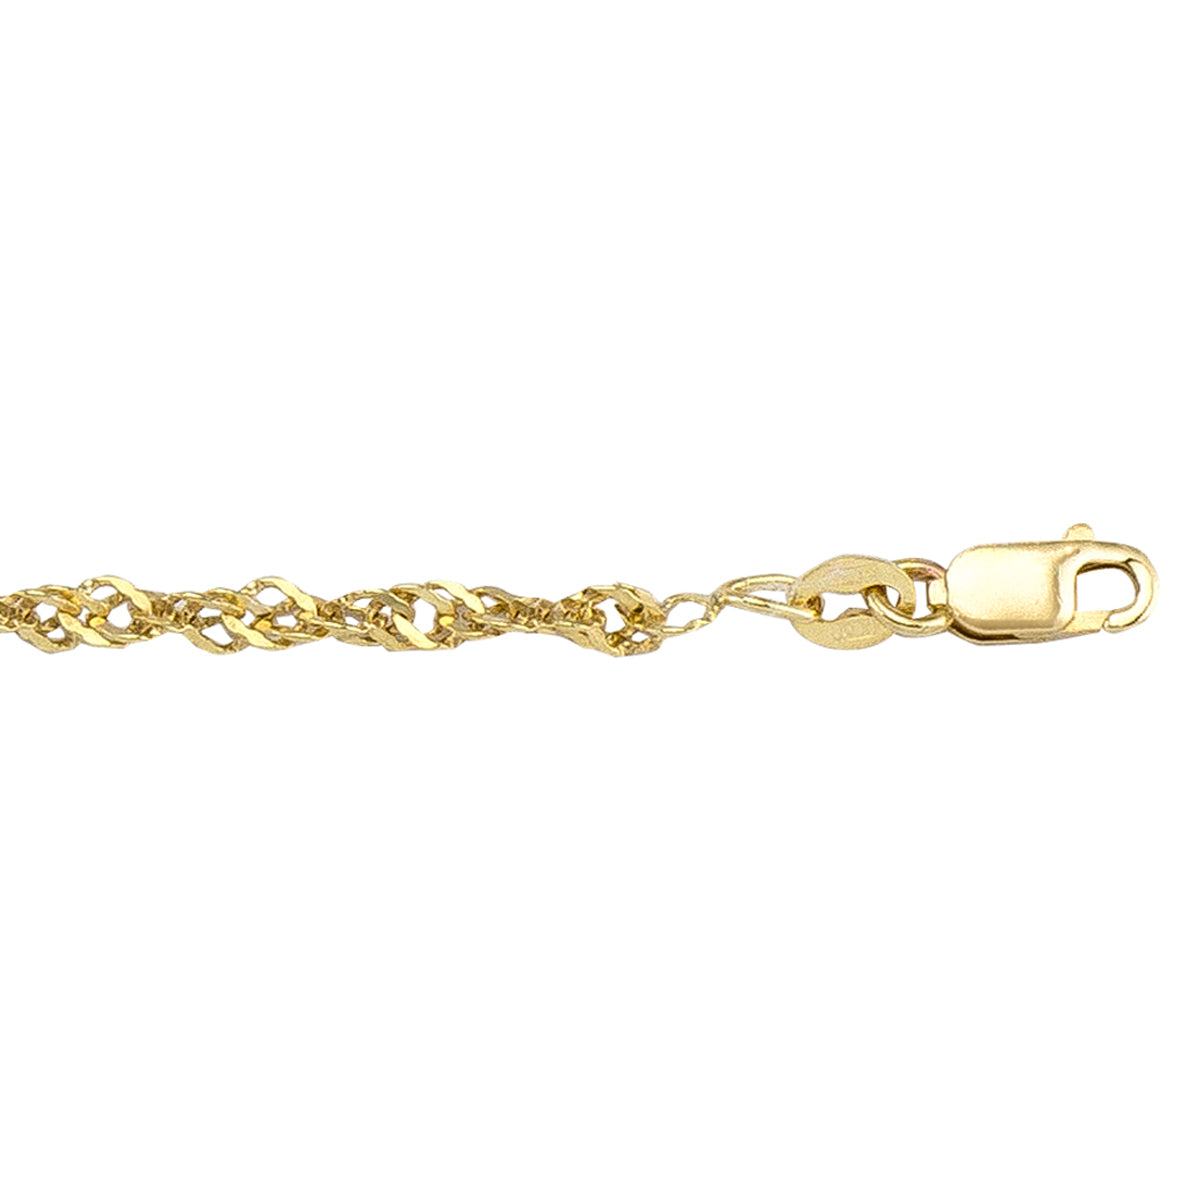 GOLD CHAIN YELLOW GOLD LIGHTLY PLATED SOLID SINGAPORE LINK